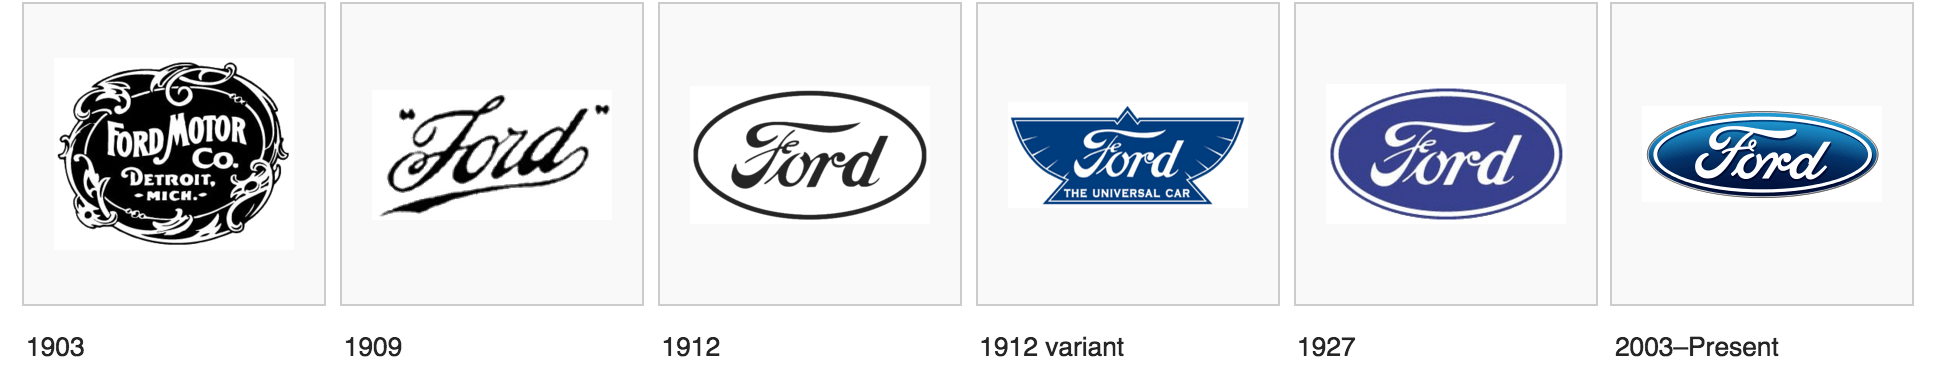 1909 Ford Logo - FORD LOGOS: A History | Lamarque Ford - Ronnie Logues